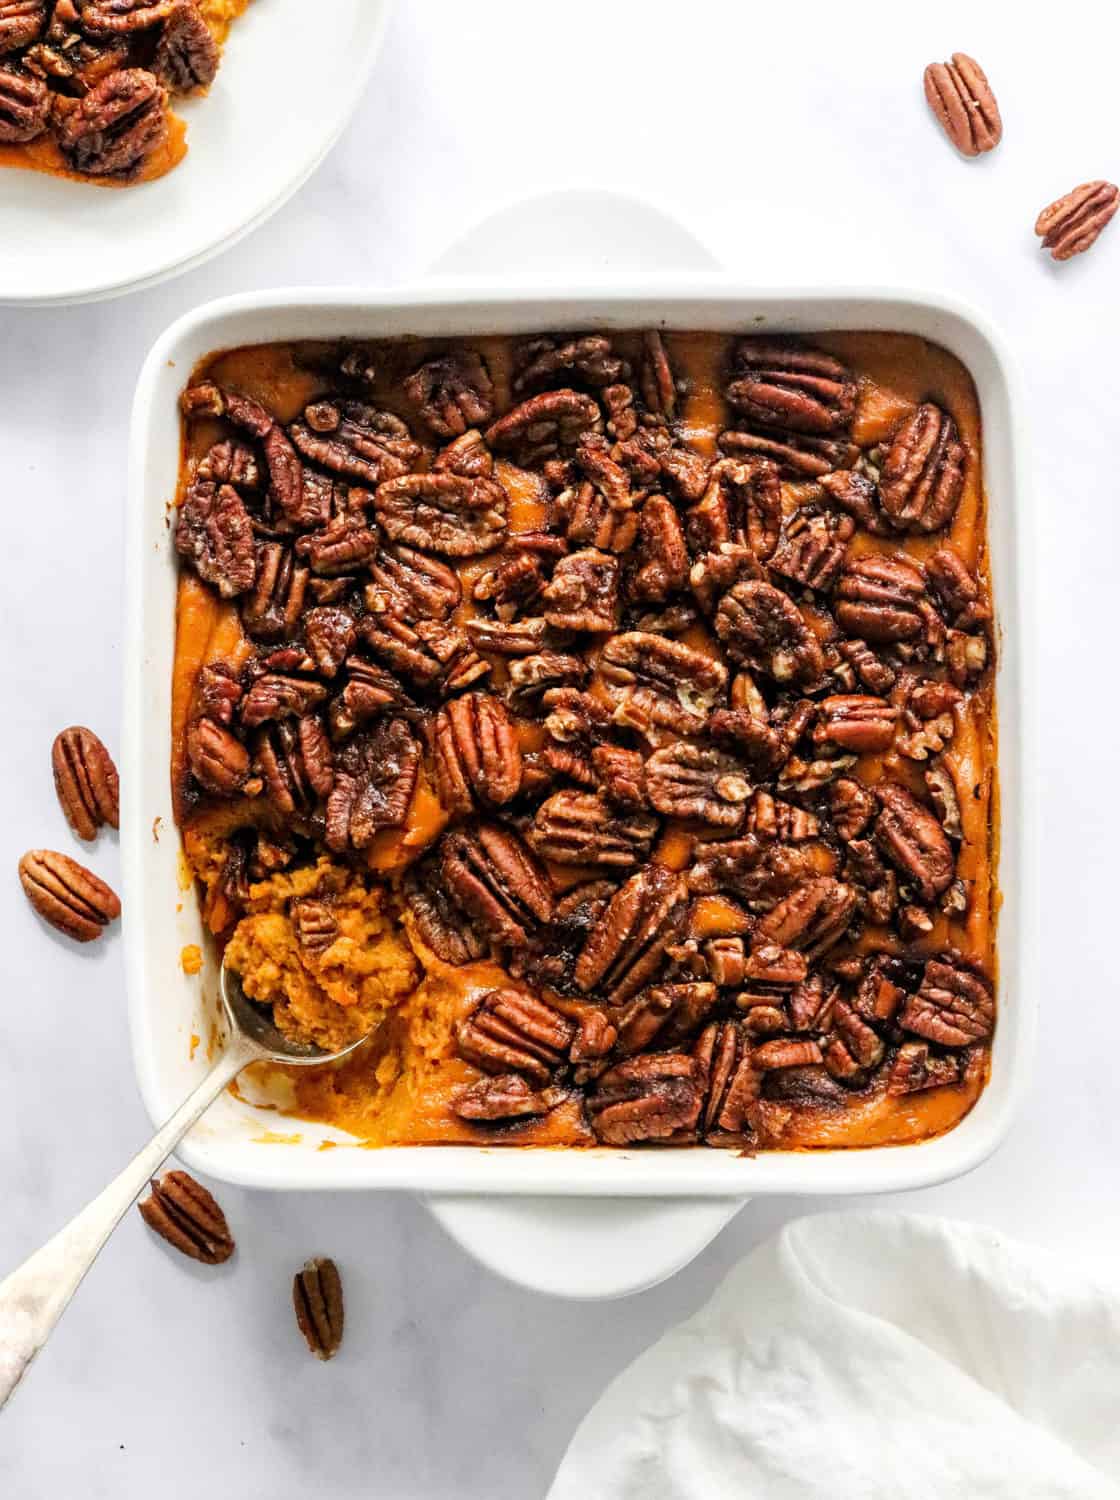 Healthy Sweet Potato Casserole With Pecan Crumble